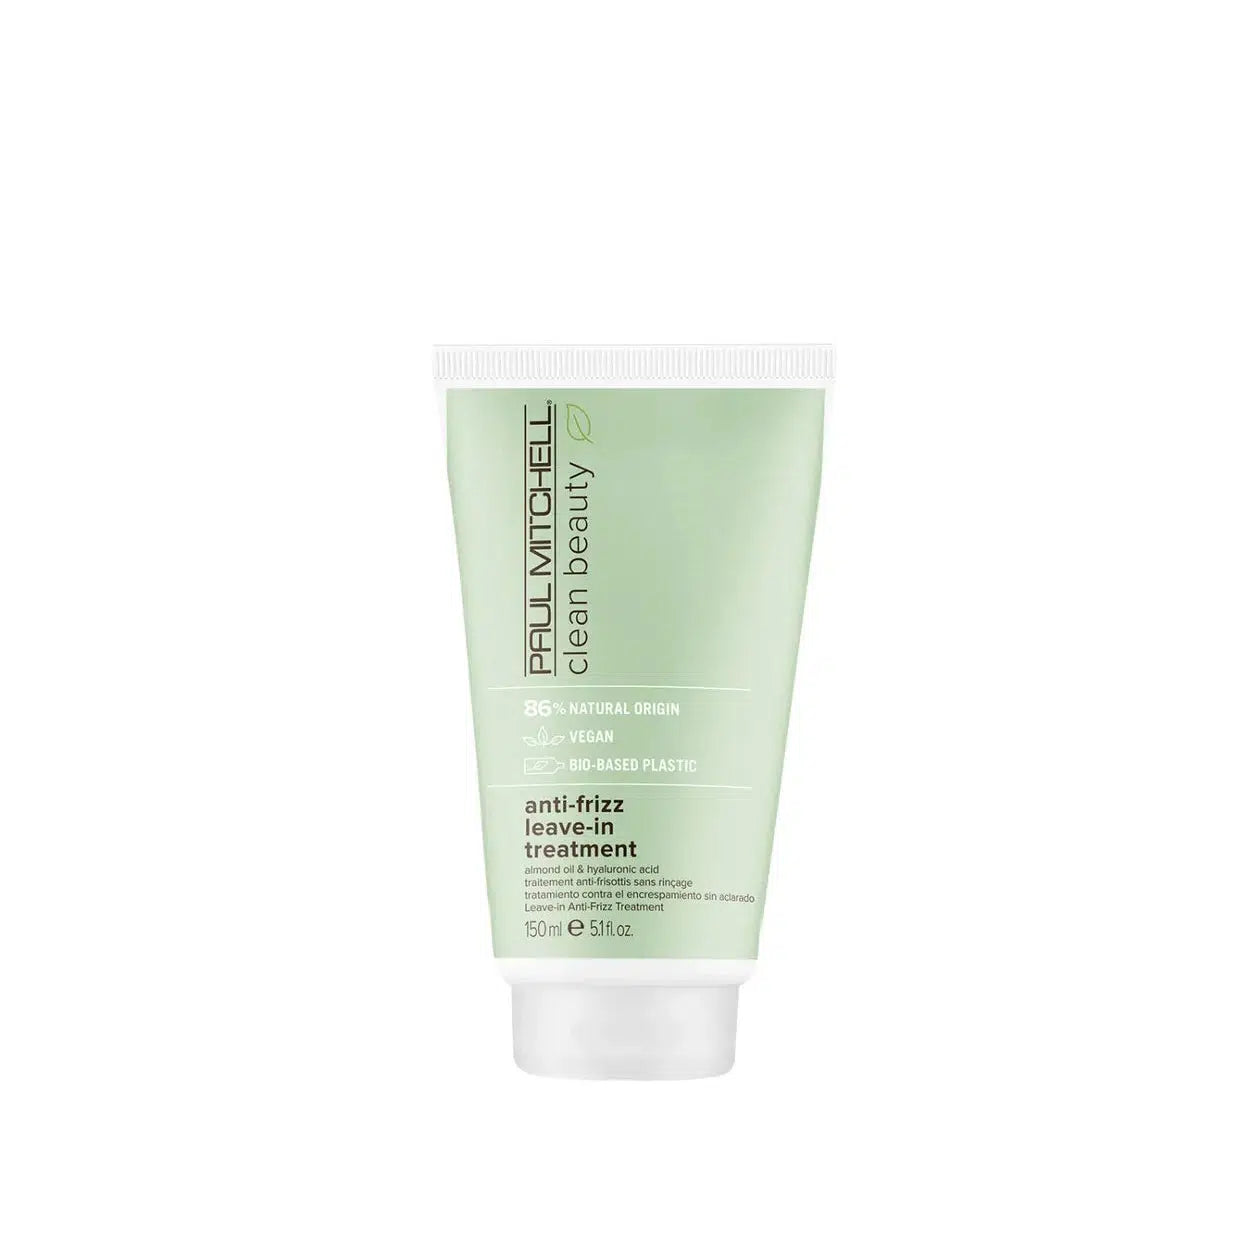 Paul Mitchell Clean Beauty Anti frizz leave in treatment 150ml